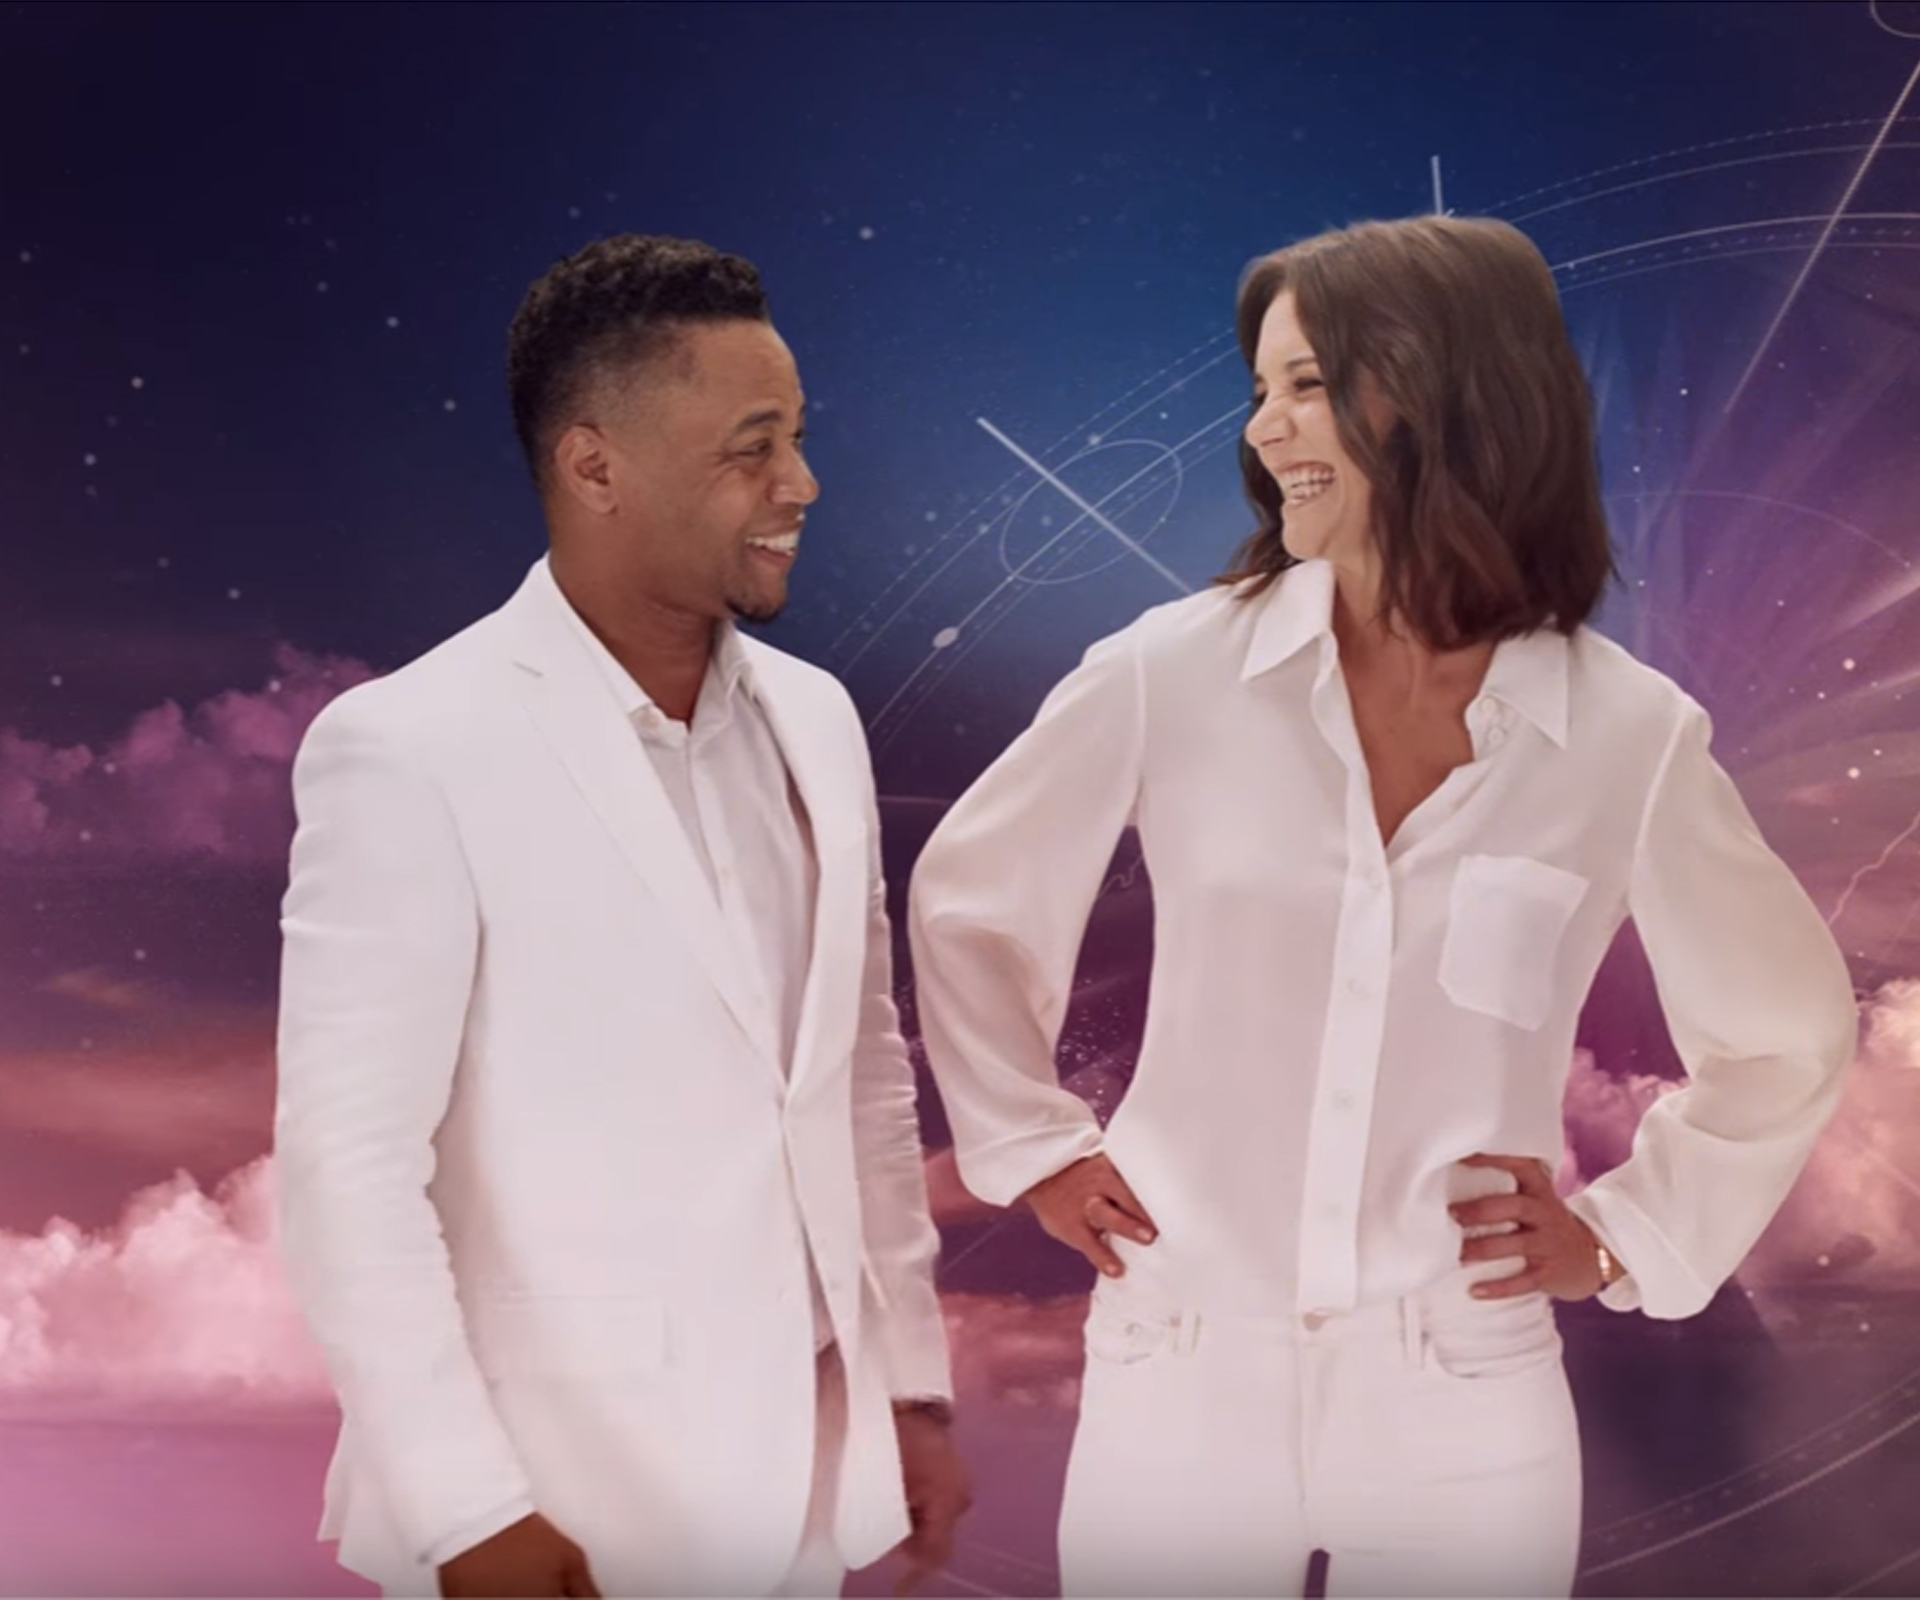 Air New Zealand safety video with Katie Holmes and Cuba Gooding Jr